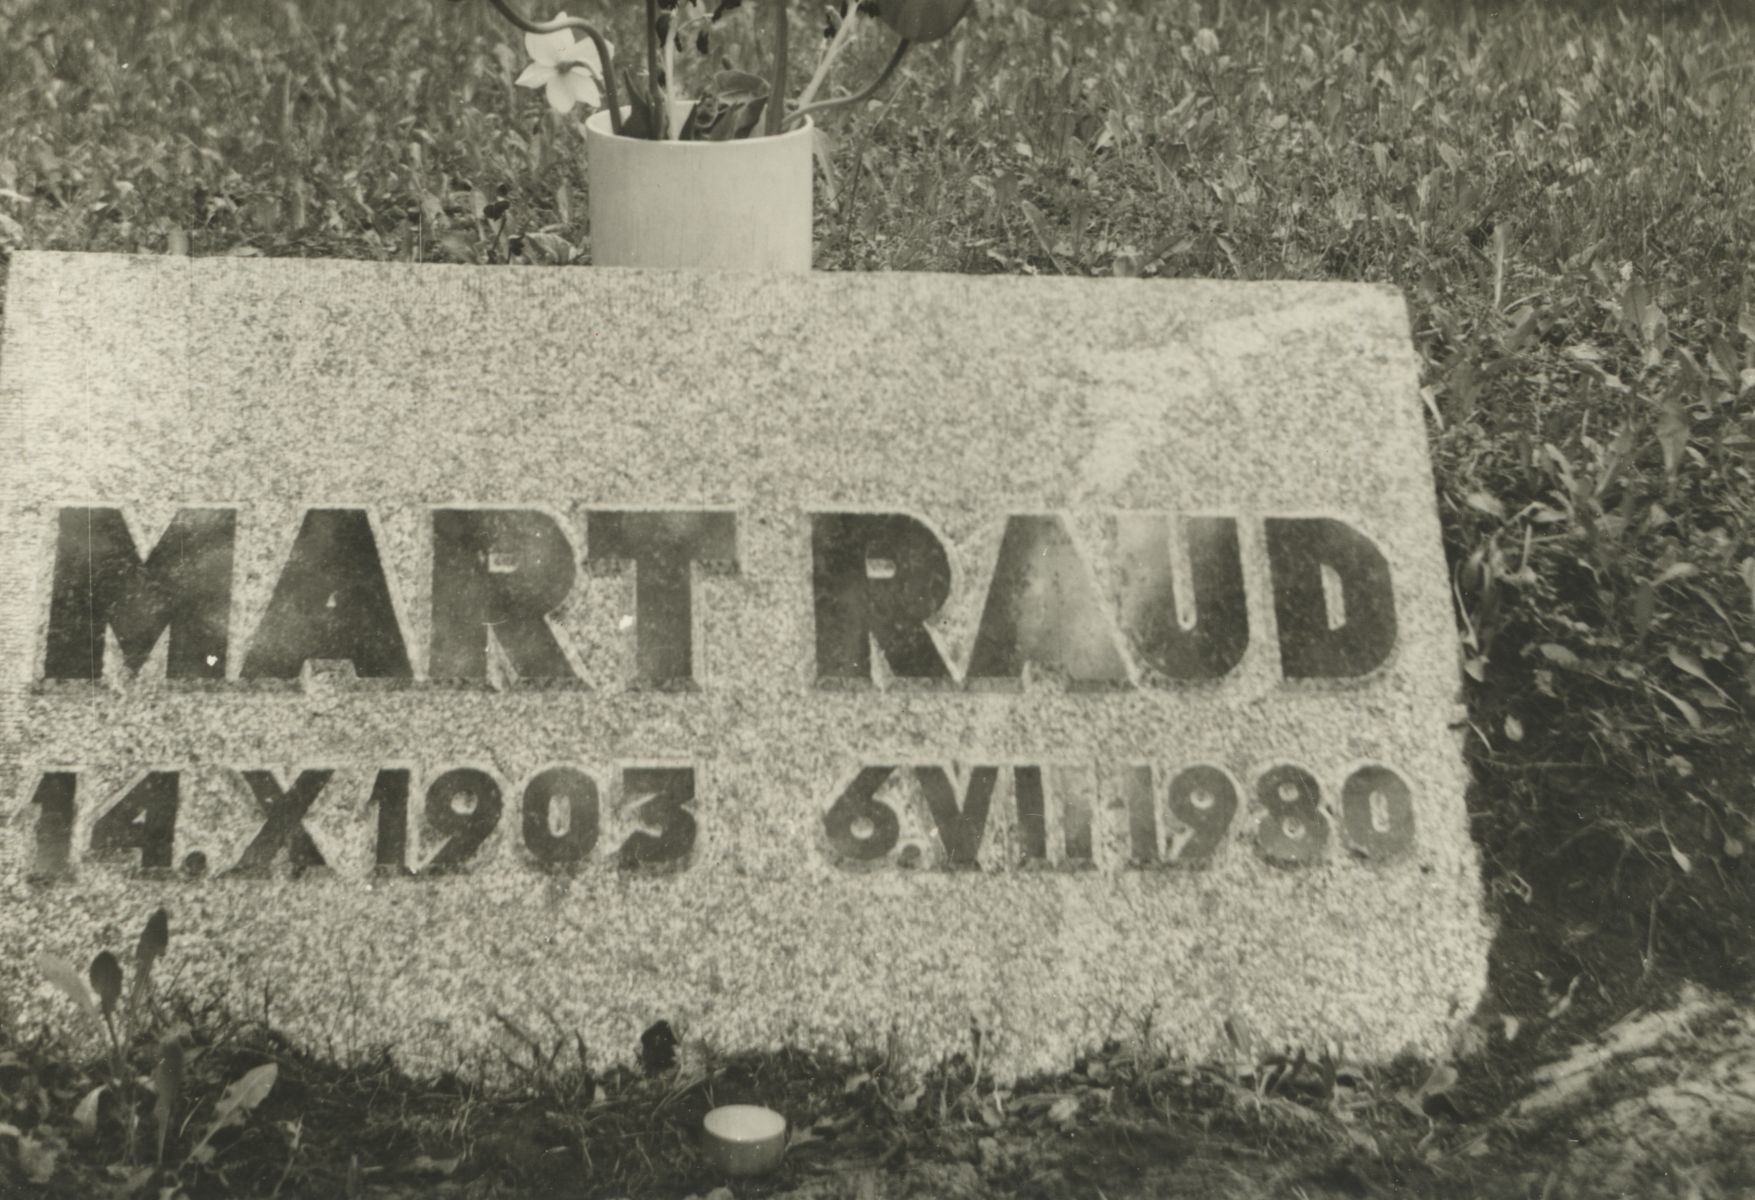 Mart Raud Grave in Tallinn on the Forest Hall